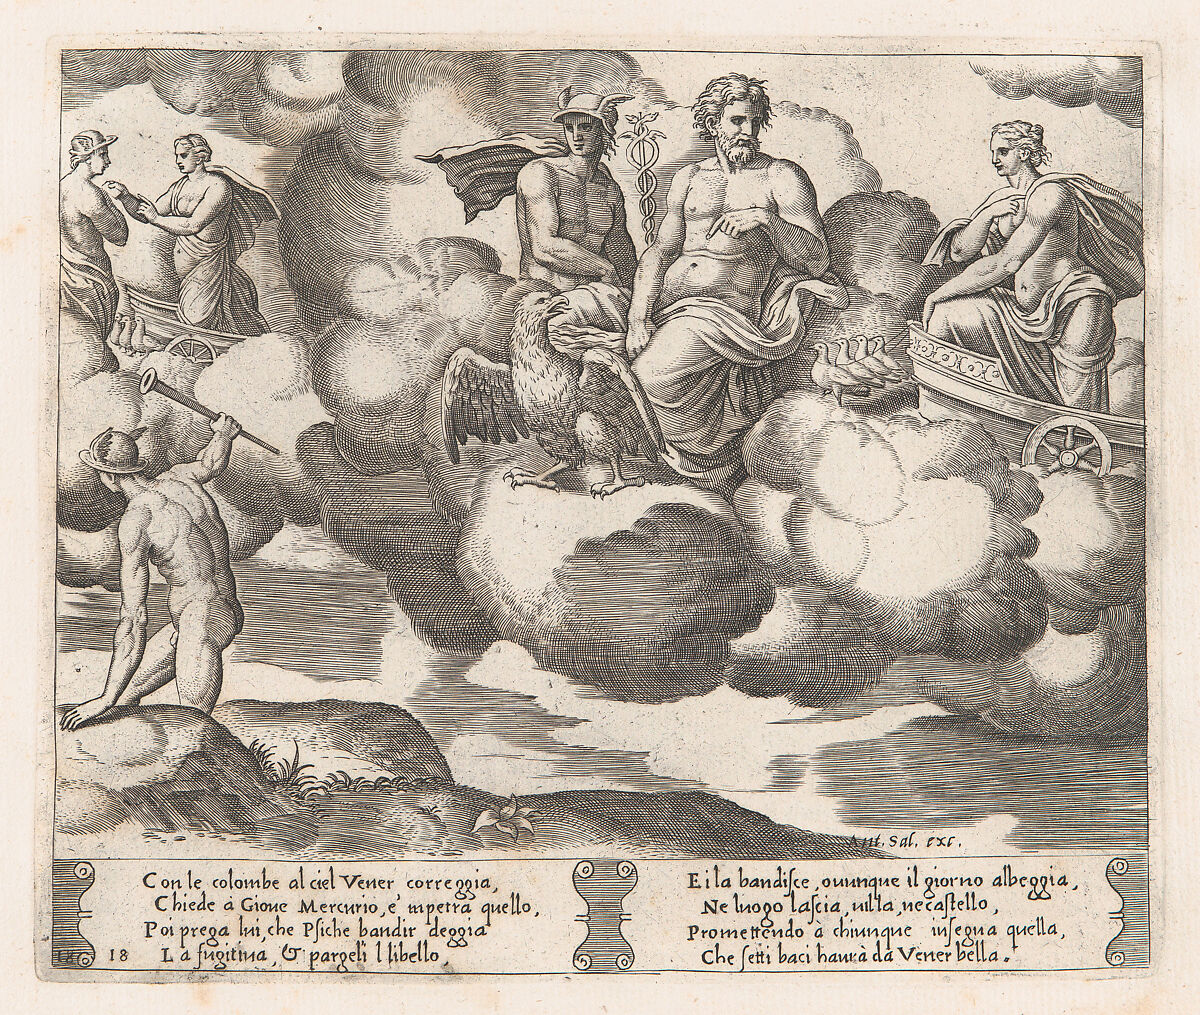 Plate 18: Venus in her dove-drawn chariot complaining to Jupiter, who is accompanied by Mercury and an eagle, at left Mercury has descended to earth, from "The Story of Cupid and Psyche as told by Apuleius", Master of the Die (Italian, active Rome, ca. 1530–60), Engraving 